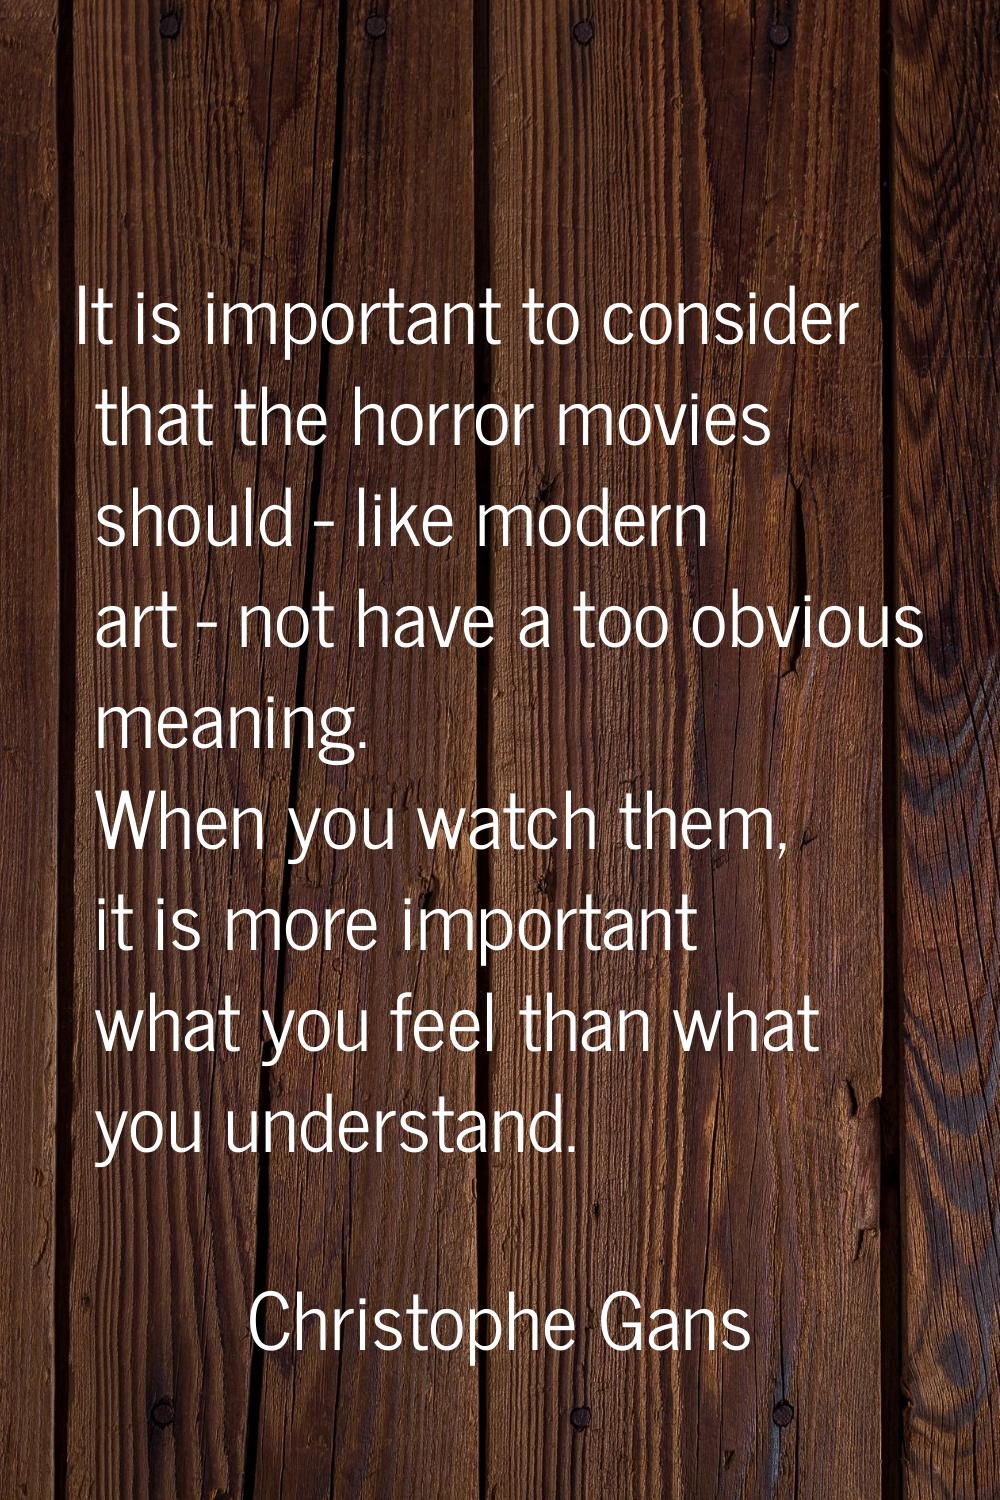 It is important to consider that the horror movies should - like modern art - not have a too obviou